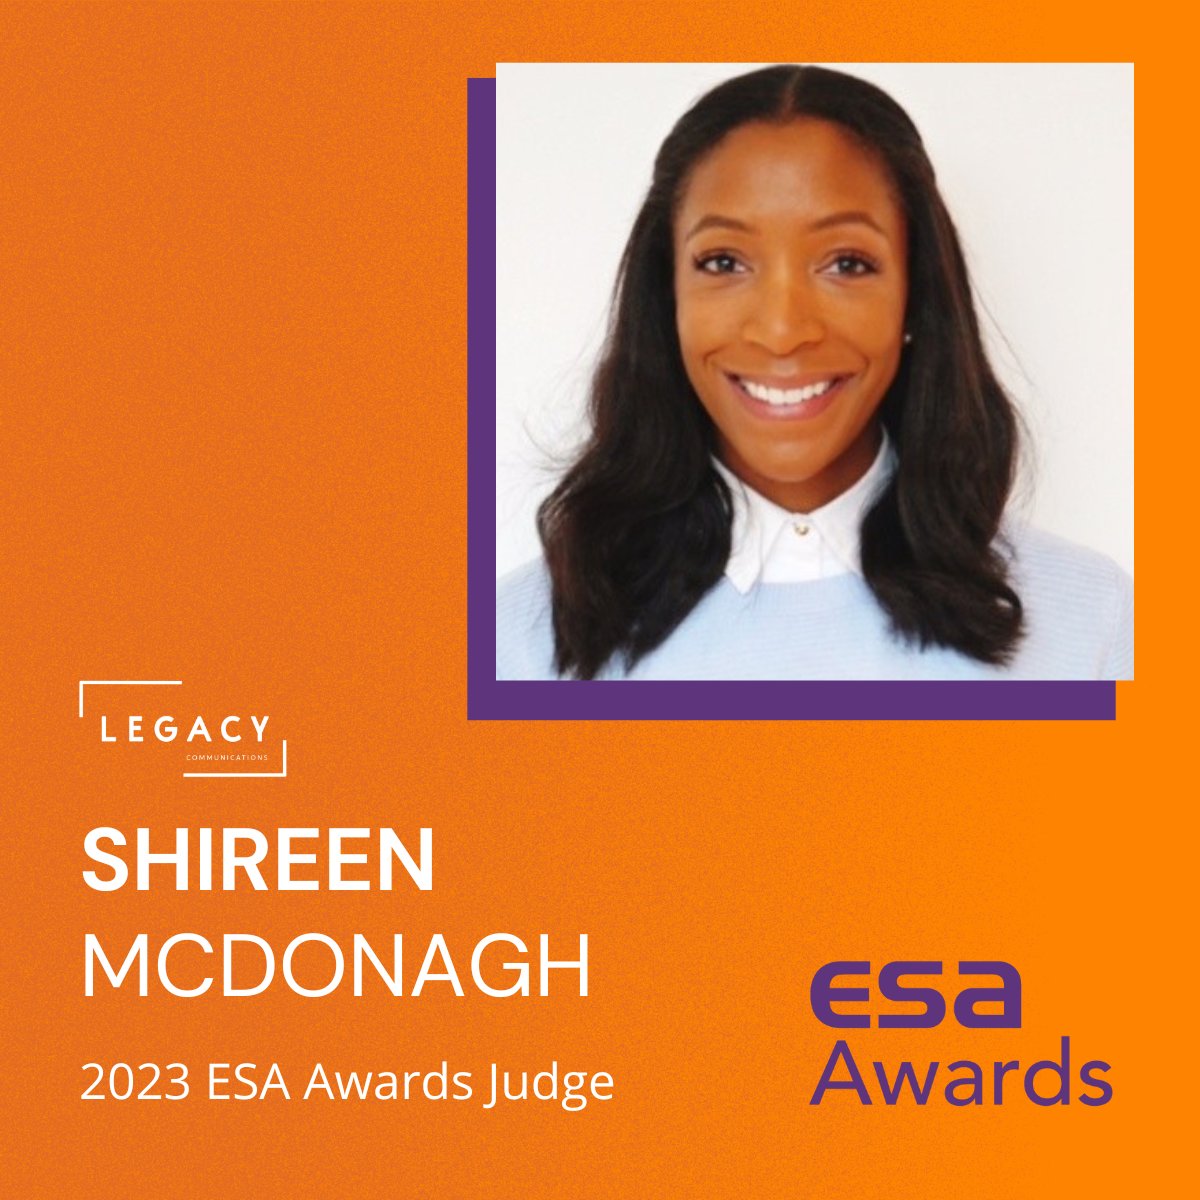 We're so proud of Shireen being selected to judge at tonight's #ESAawards 2023.

As Legacy's Head of Brand and Sponsorship, Shireen brings her experience and industry knowledge to the judging process. Best of luck to Shireen and our shortlisted clients.